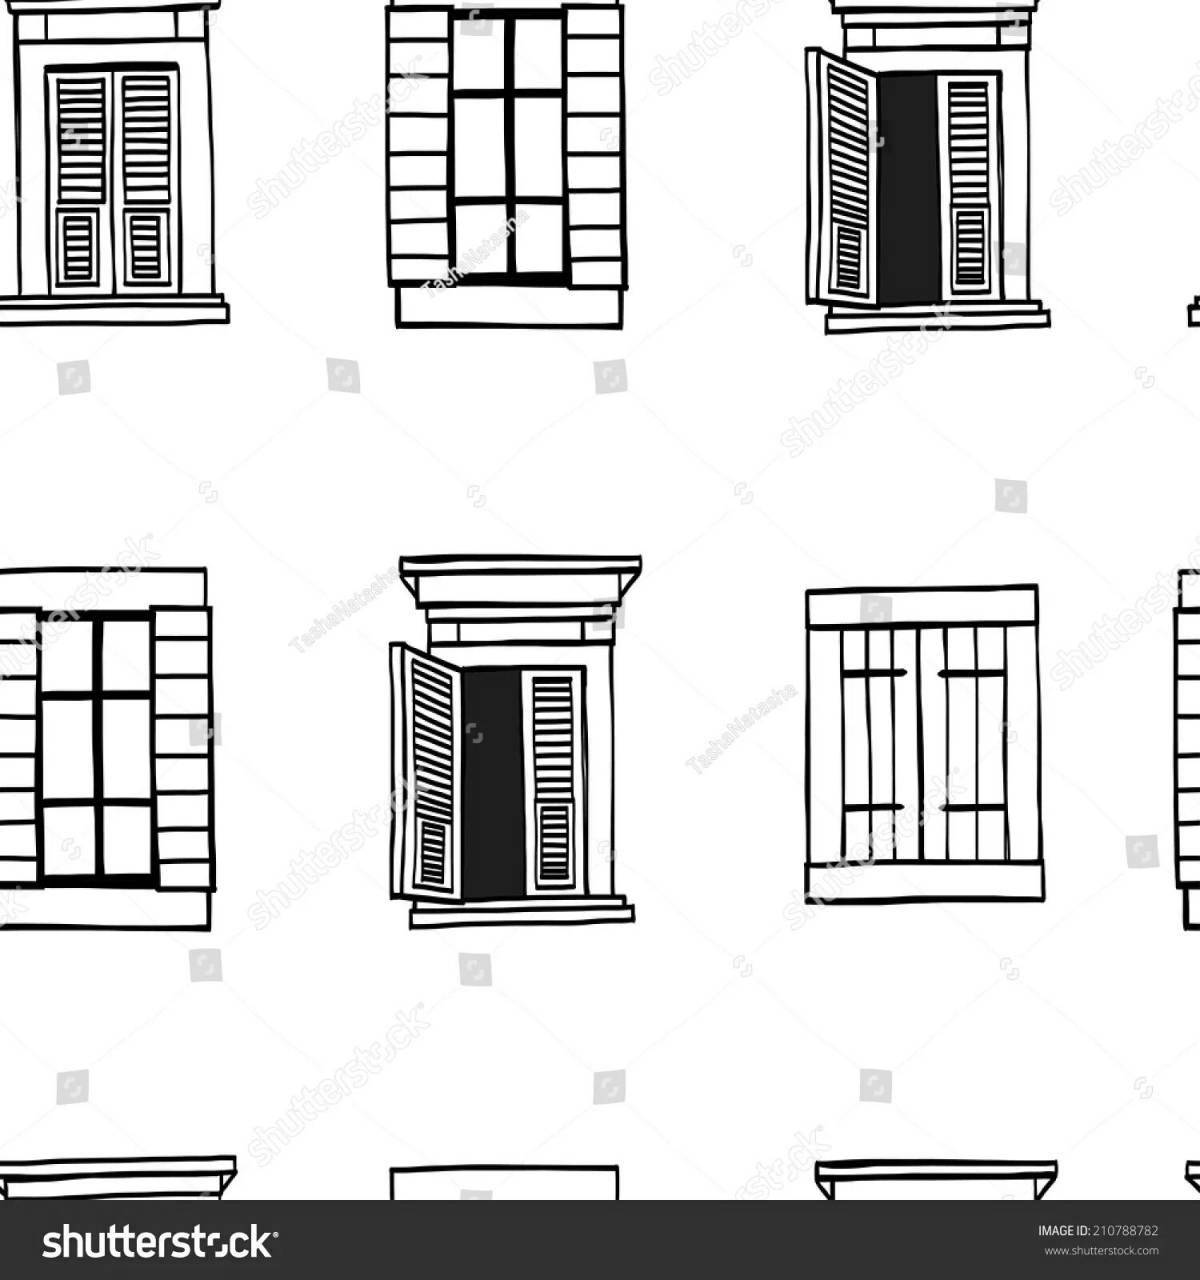 Colored window with shutters